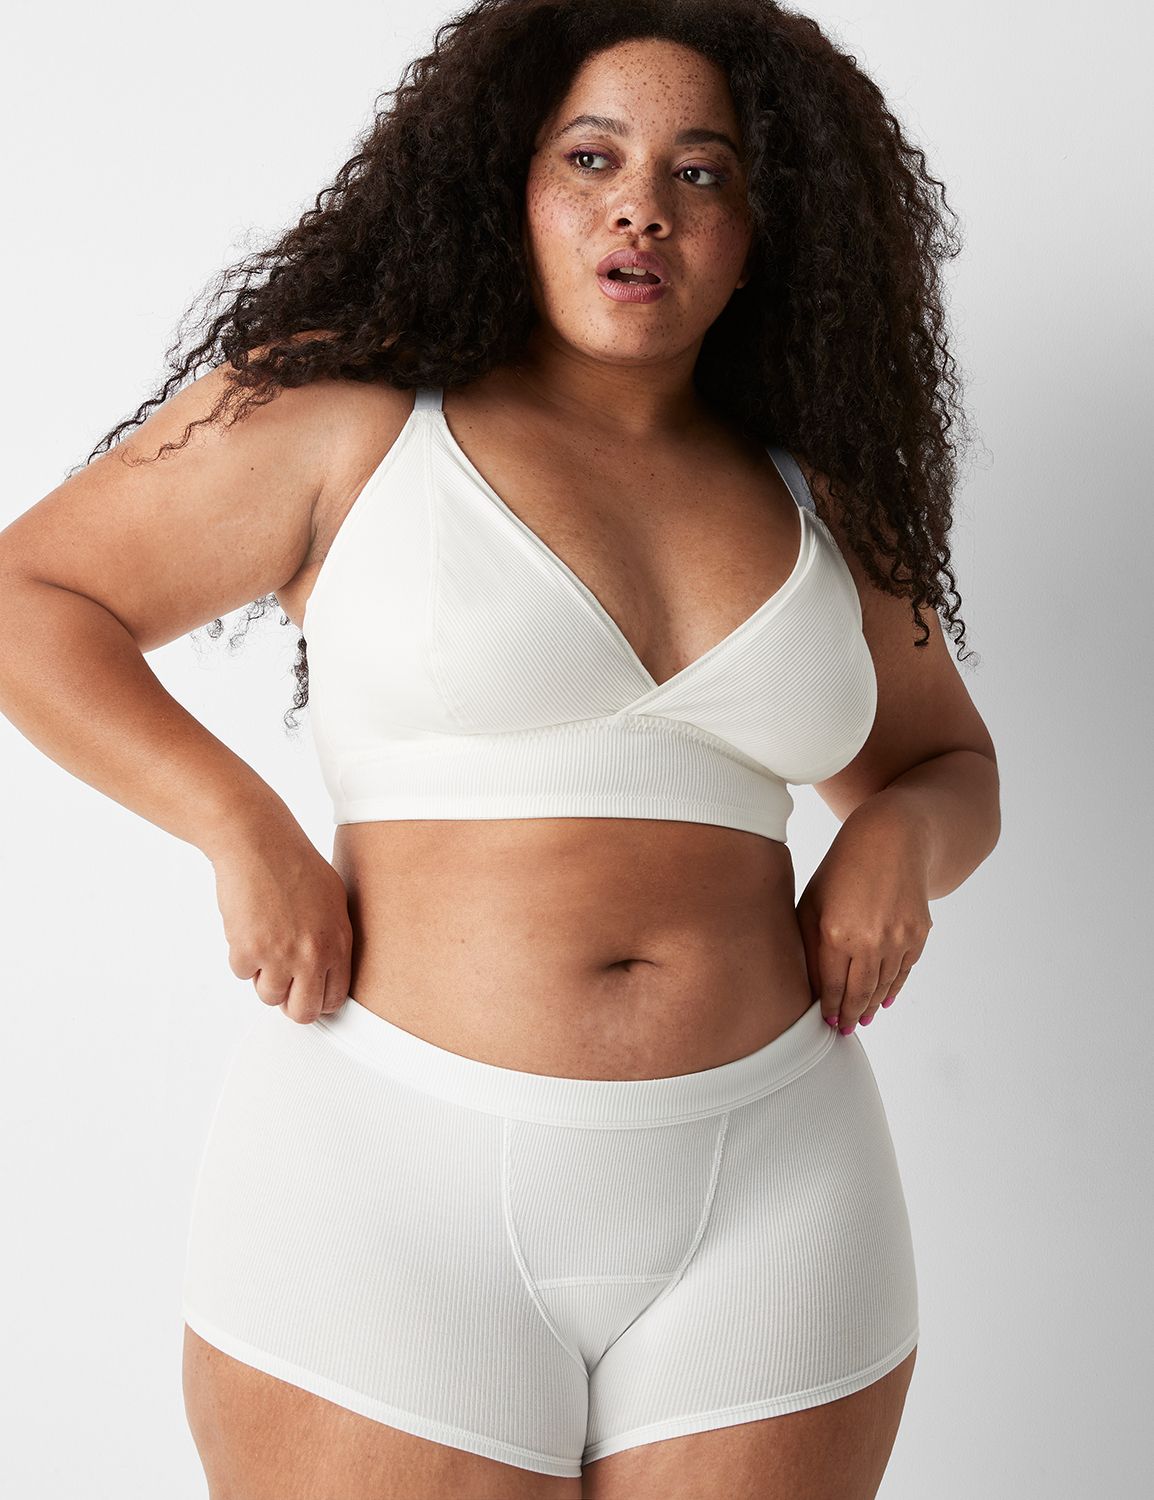 DDD-Sized Shoppers Say This $20 Bra Makes Boobs Look So Much “Perkier”